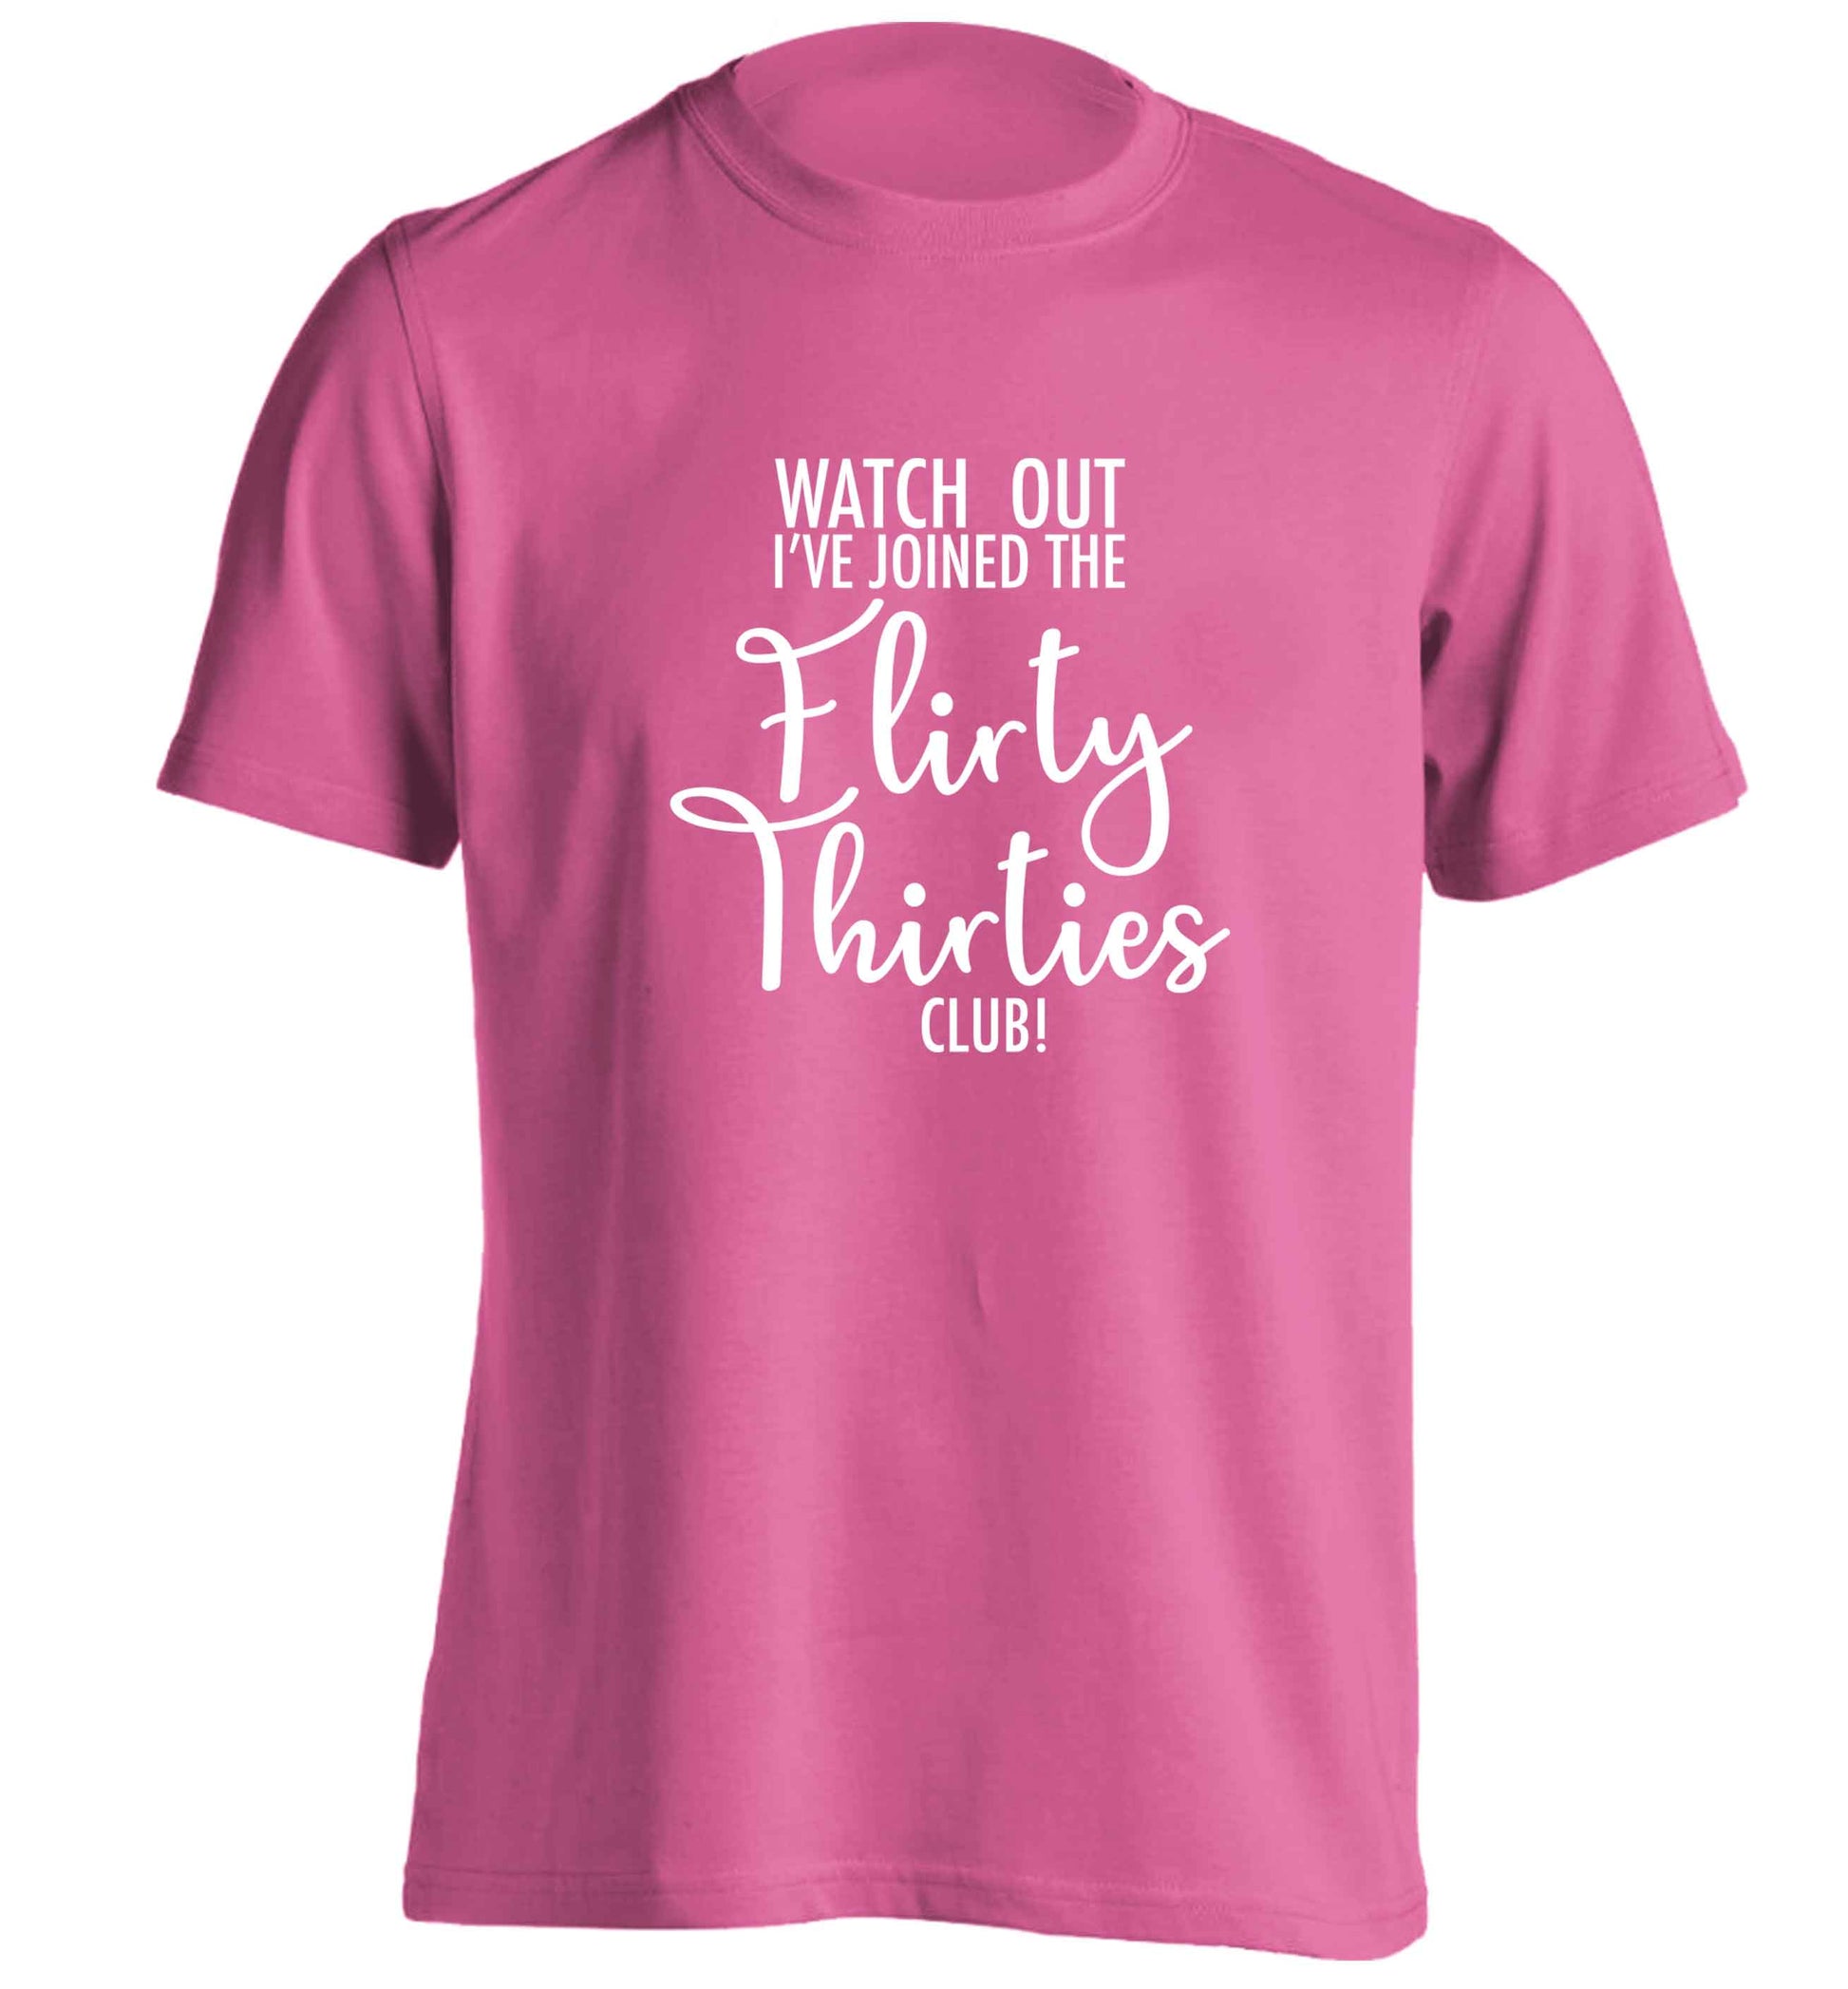 Watch out I've joined the flirty thirties club adults unisex pink Tshirt 2XL